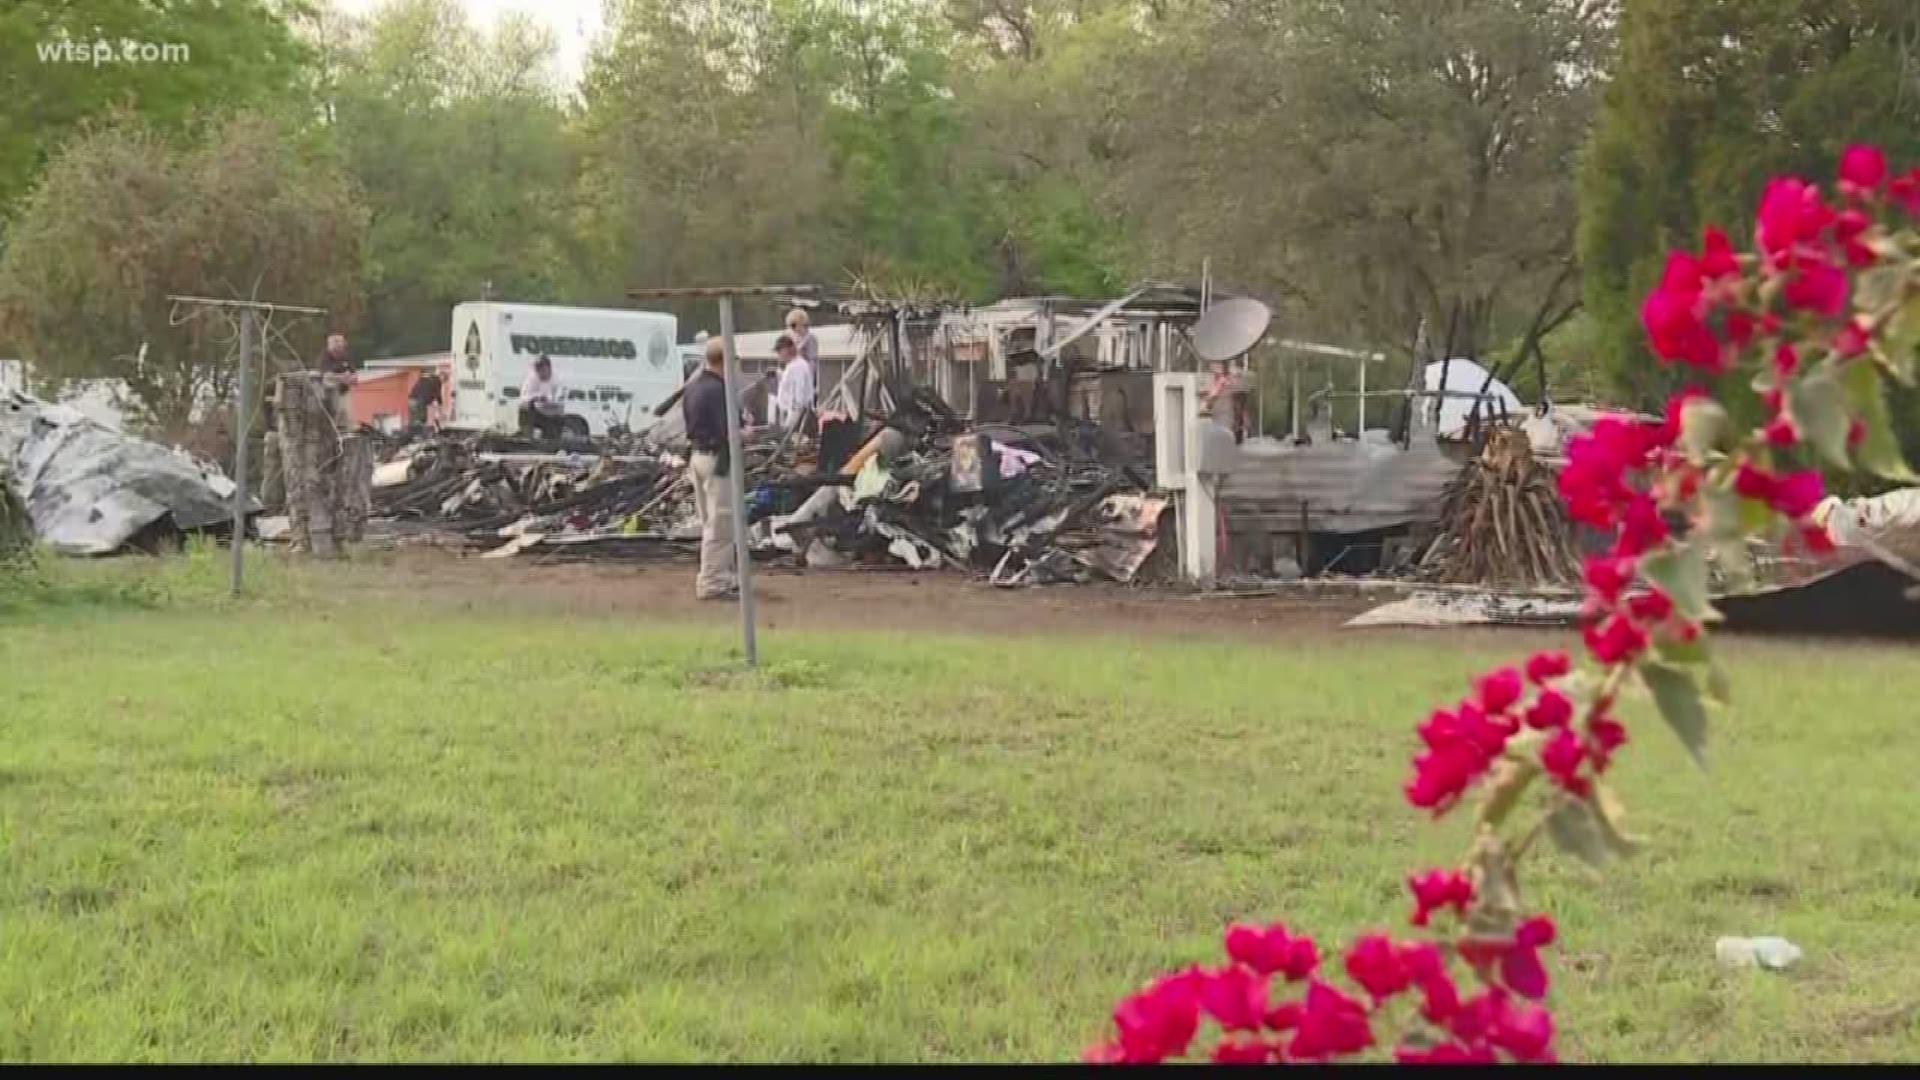 An elderly woman is dead and an elderly man is in the hospital after a mobile home fire in Pasco County.